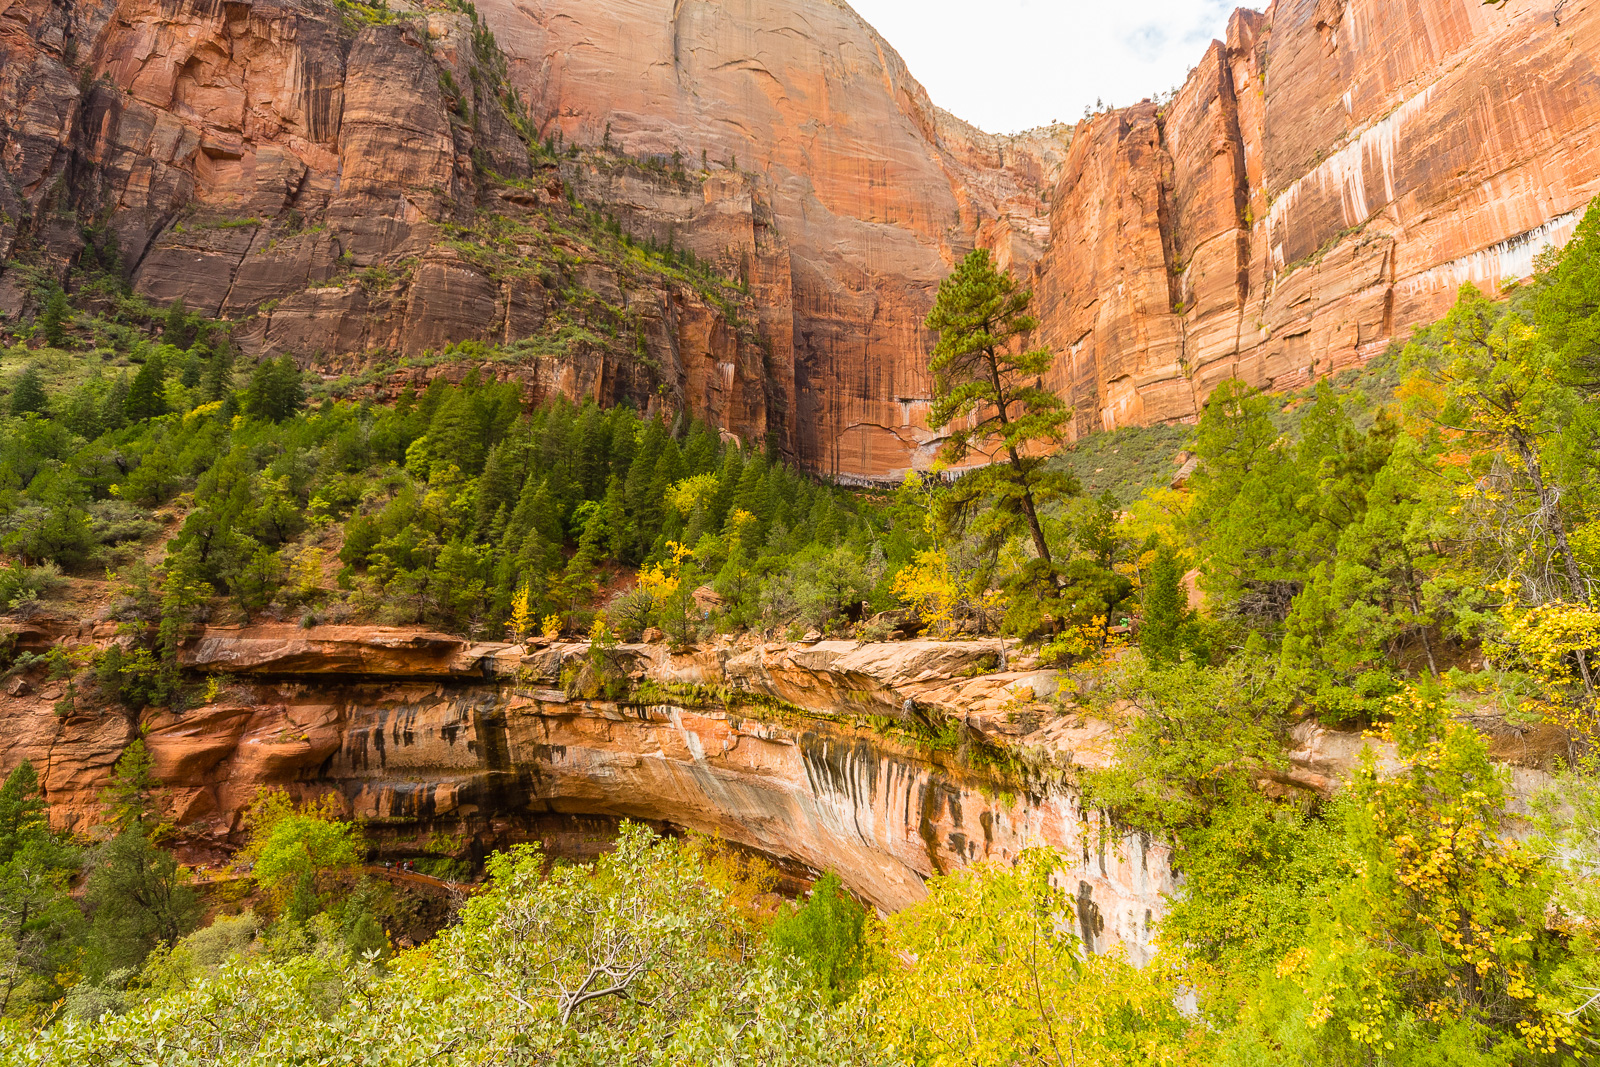 Look toward the middle Emerald Pool, Zion National Park, October, 2014.